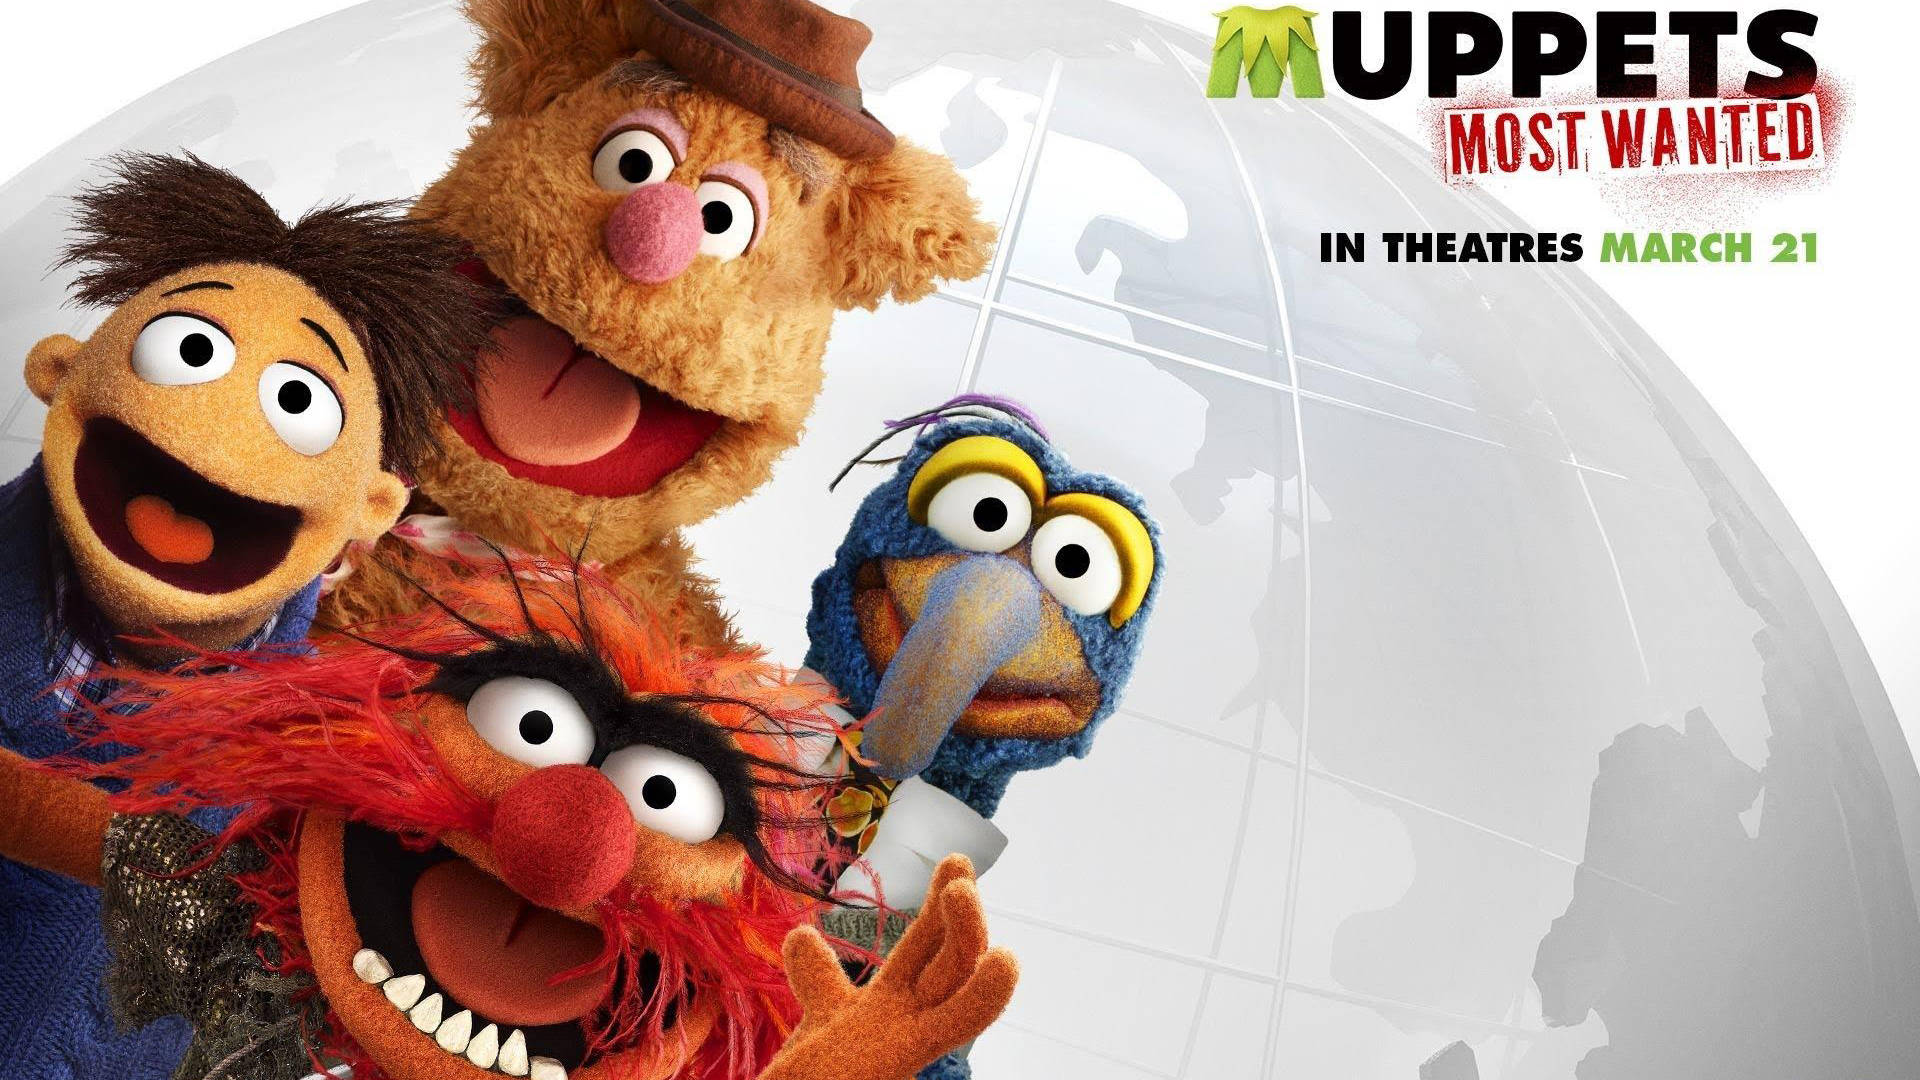 Download Muppets Most Wanted Walter, Fozzie, Animal, Gonzo Wallpapers